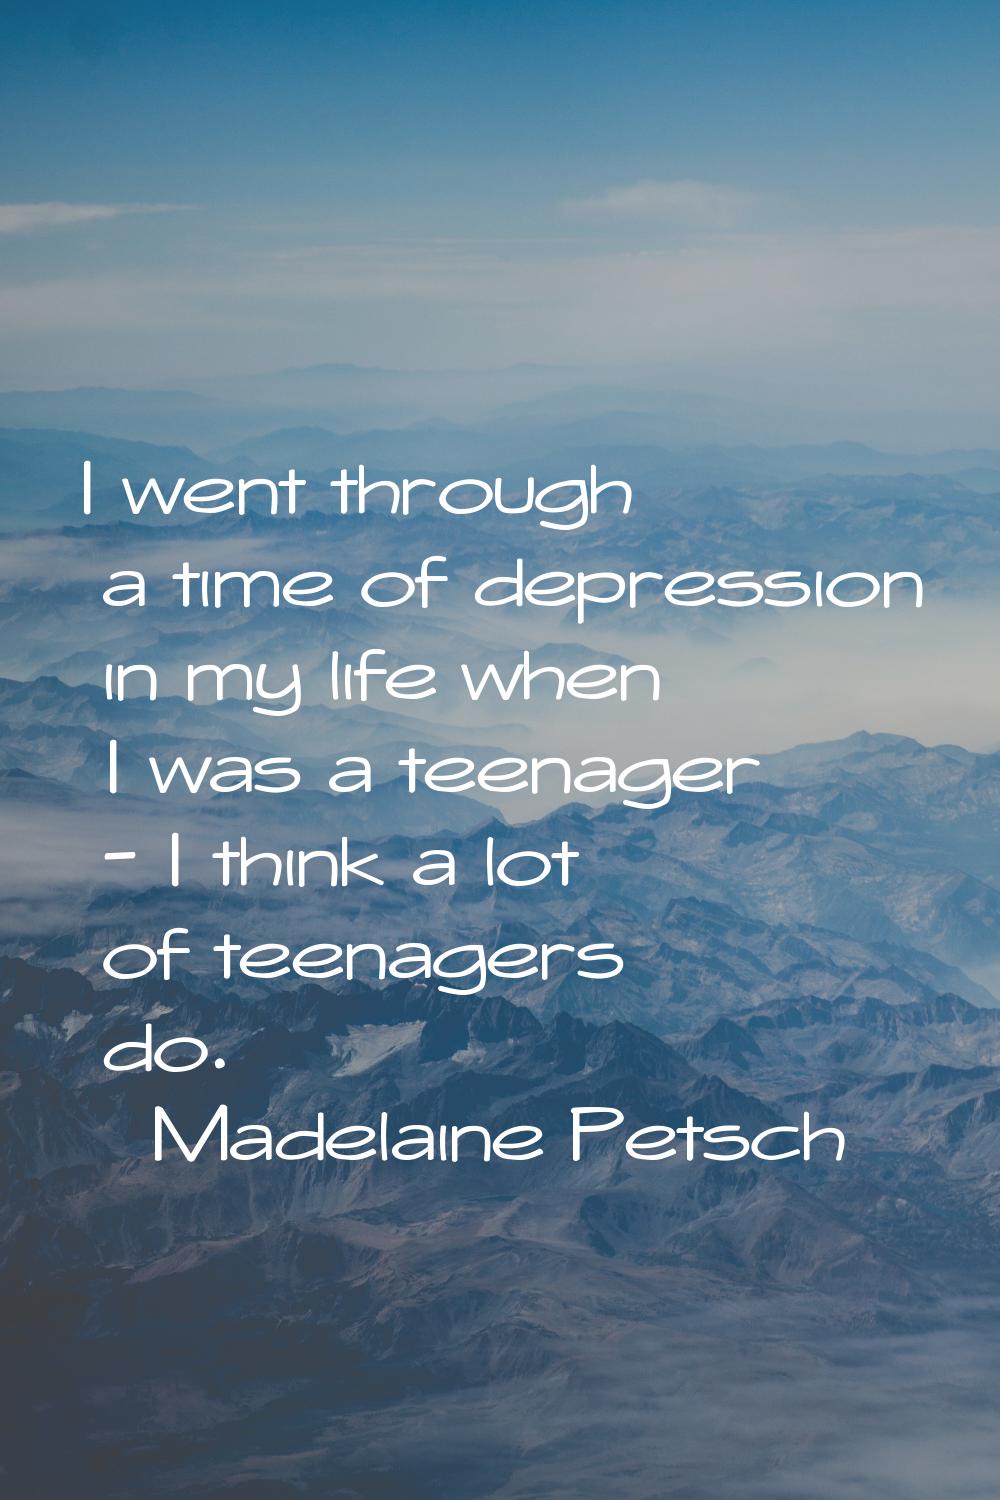 I went through a time of depression in my life when I was a teenager - I think a lot of teenagers d